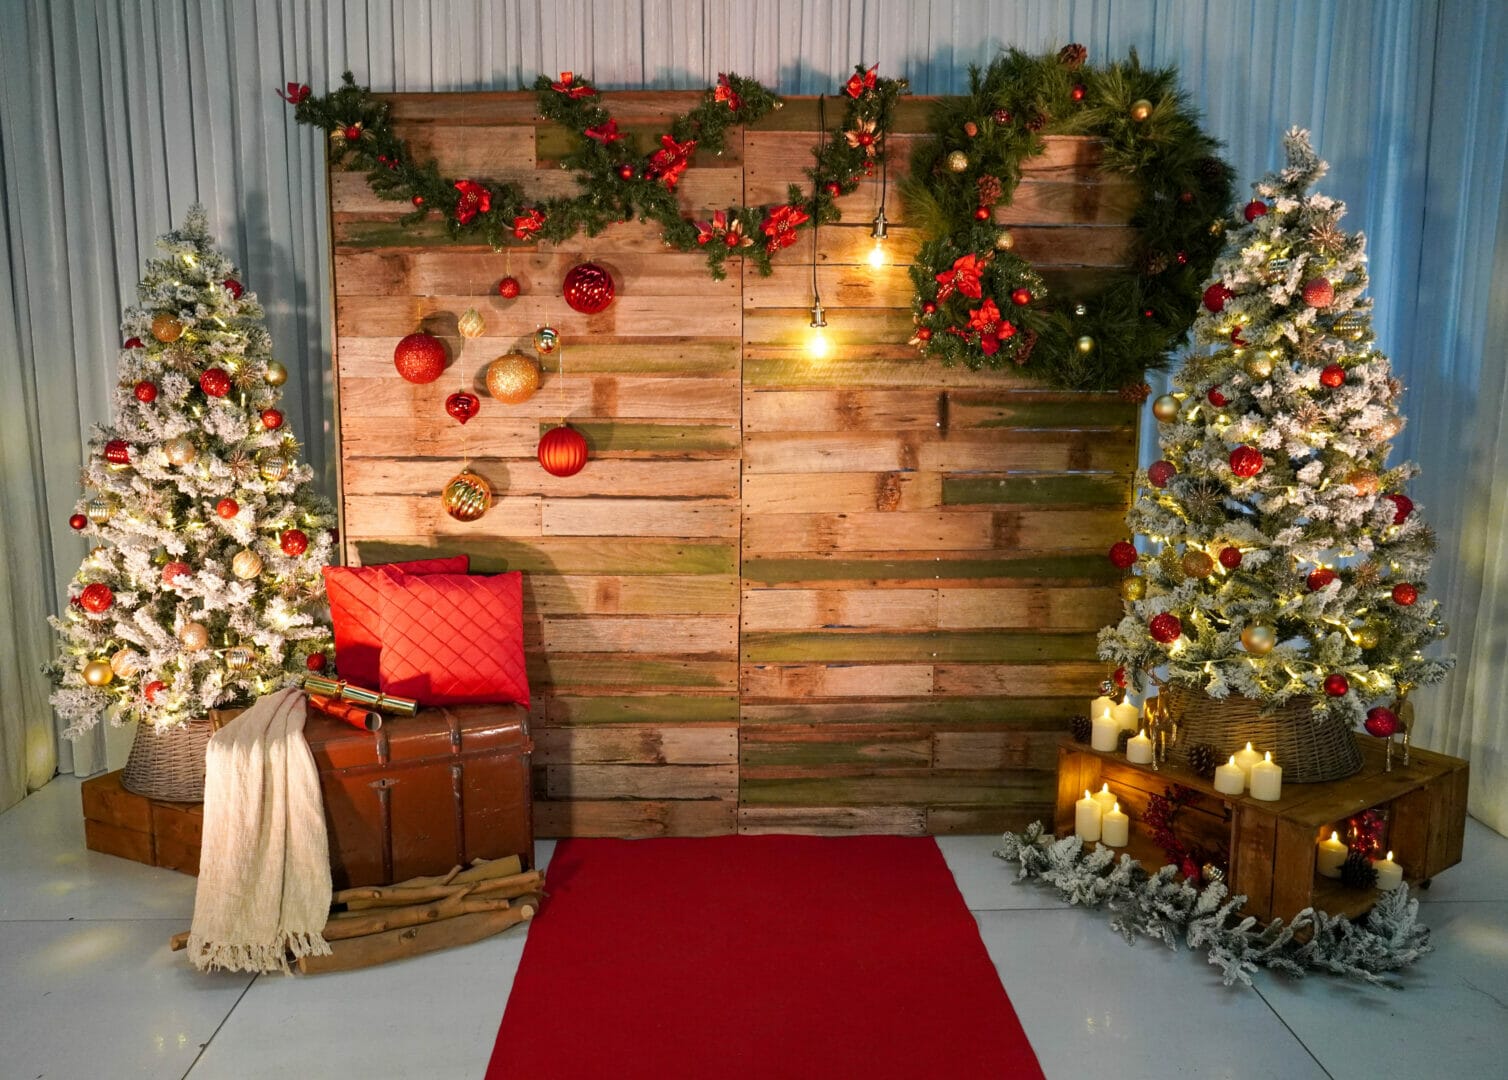 christmas themed rustic backdrop with ornaments, frosted pine trees, cushions, garlands and wreaths